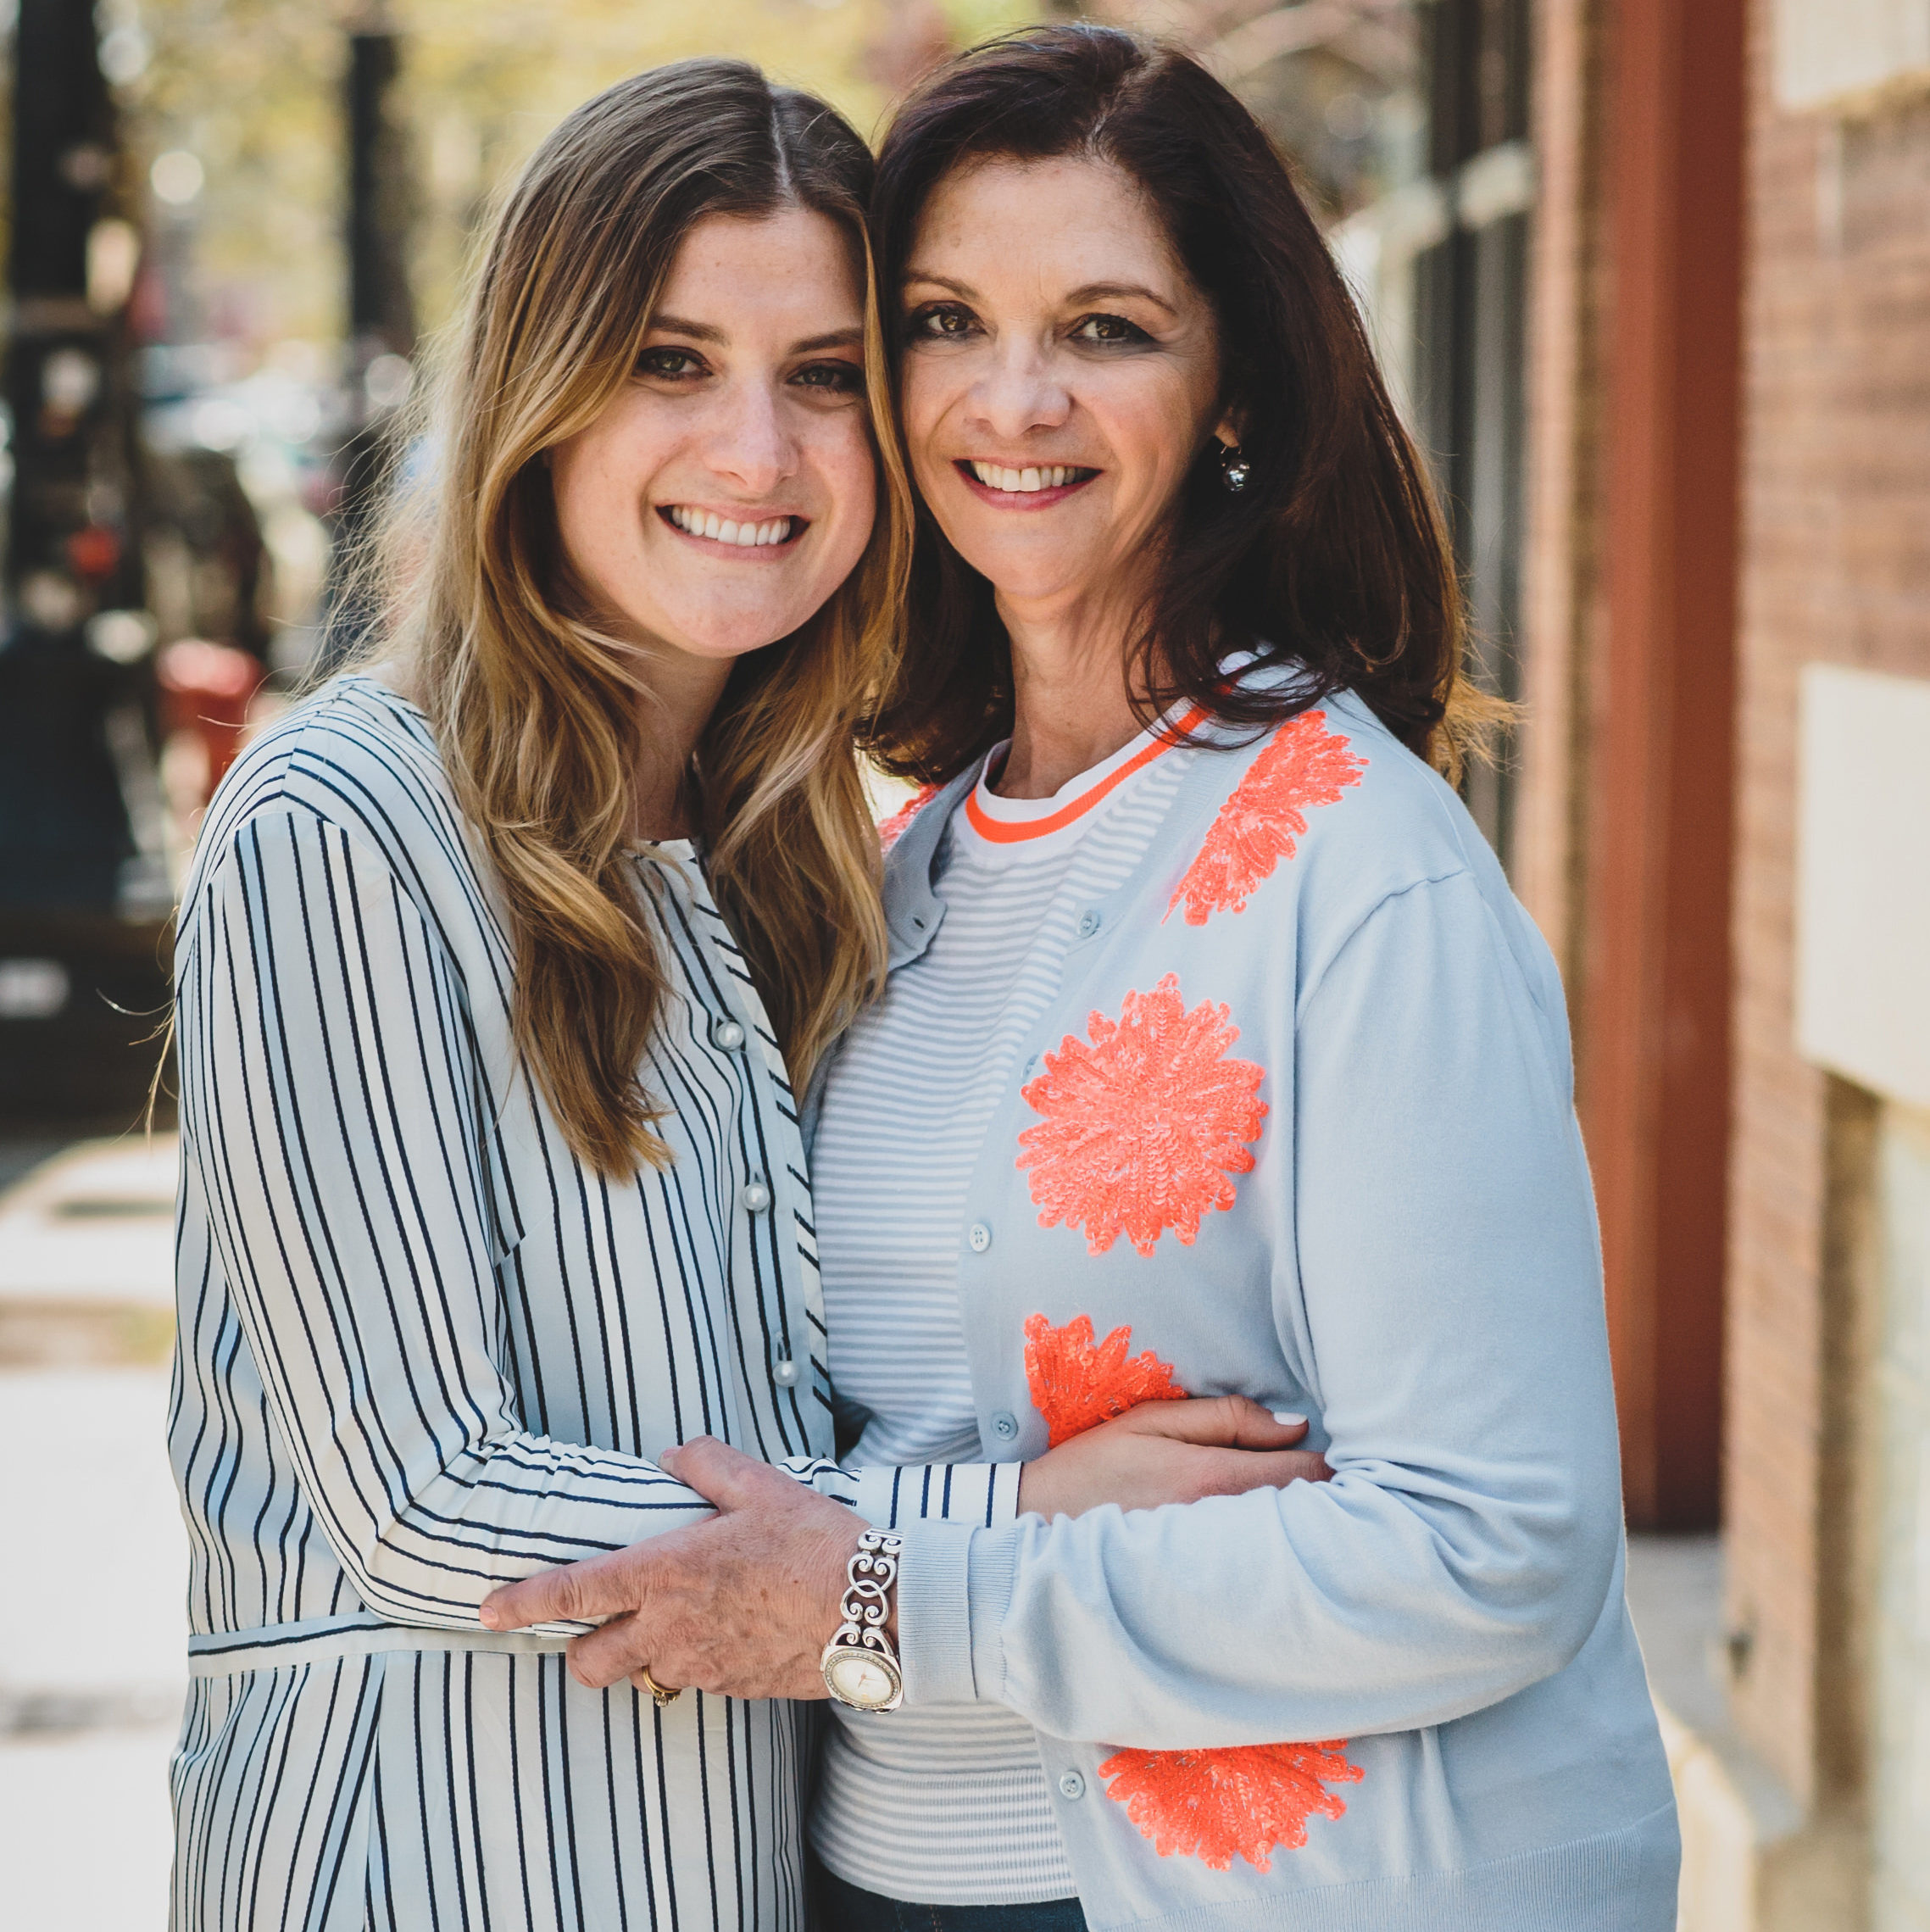 Allison Feder, Sales Director at Amobee, and her mother